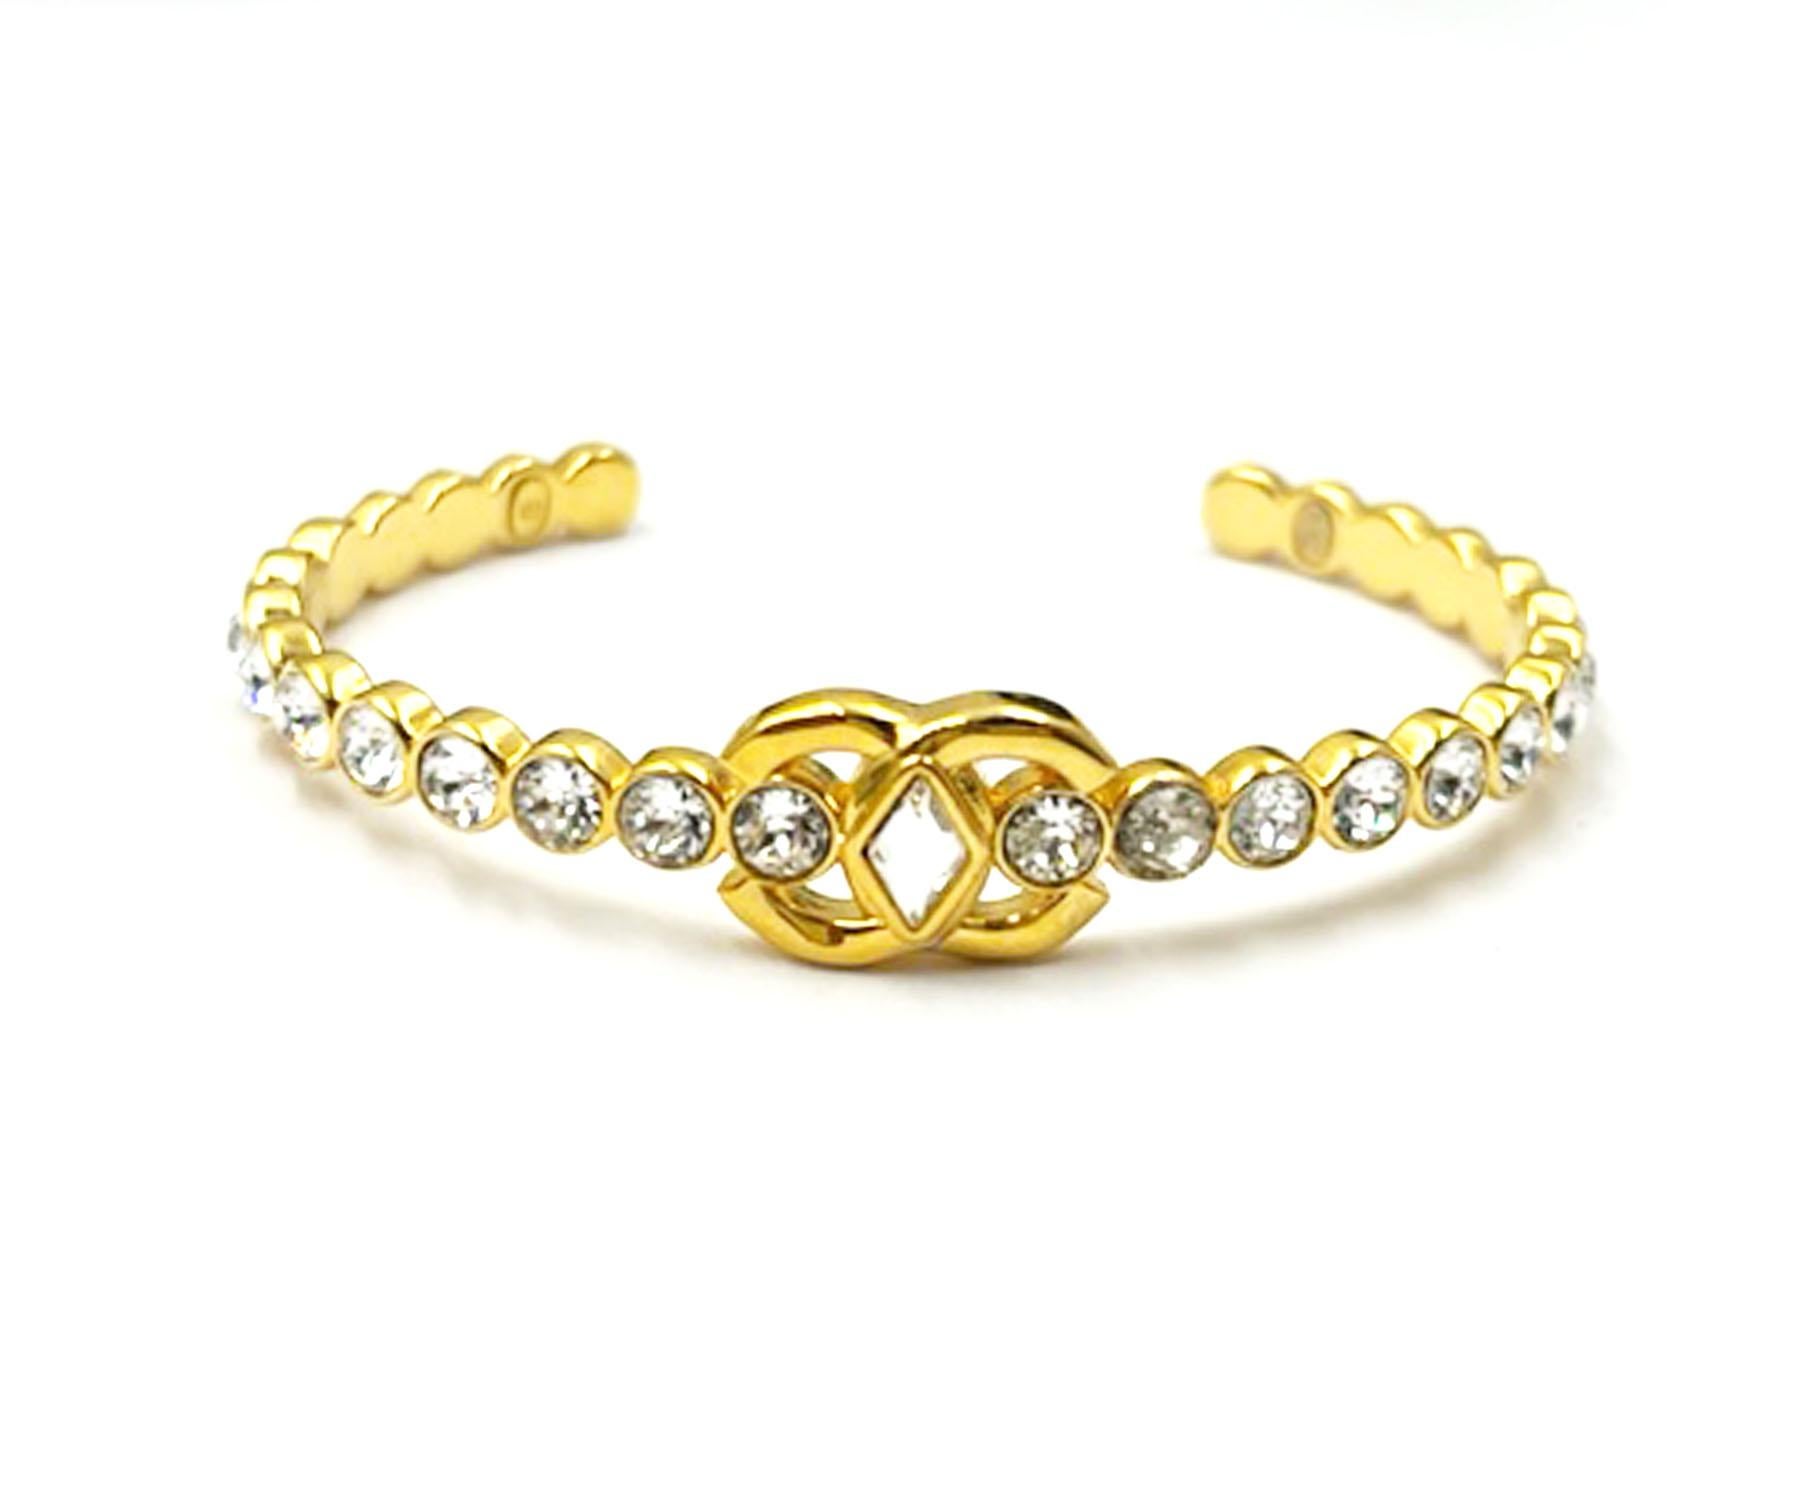 Chanel Gold Plated CC Marquise Round Crystal Bangle Cuff Bracelet

*Marked 23
*Made in Italy
*Comes with the original box and pouch

-It is approximately 2.25